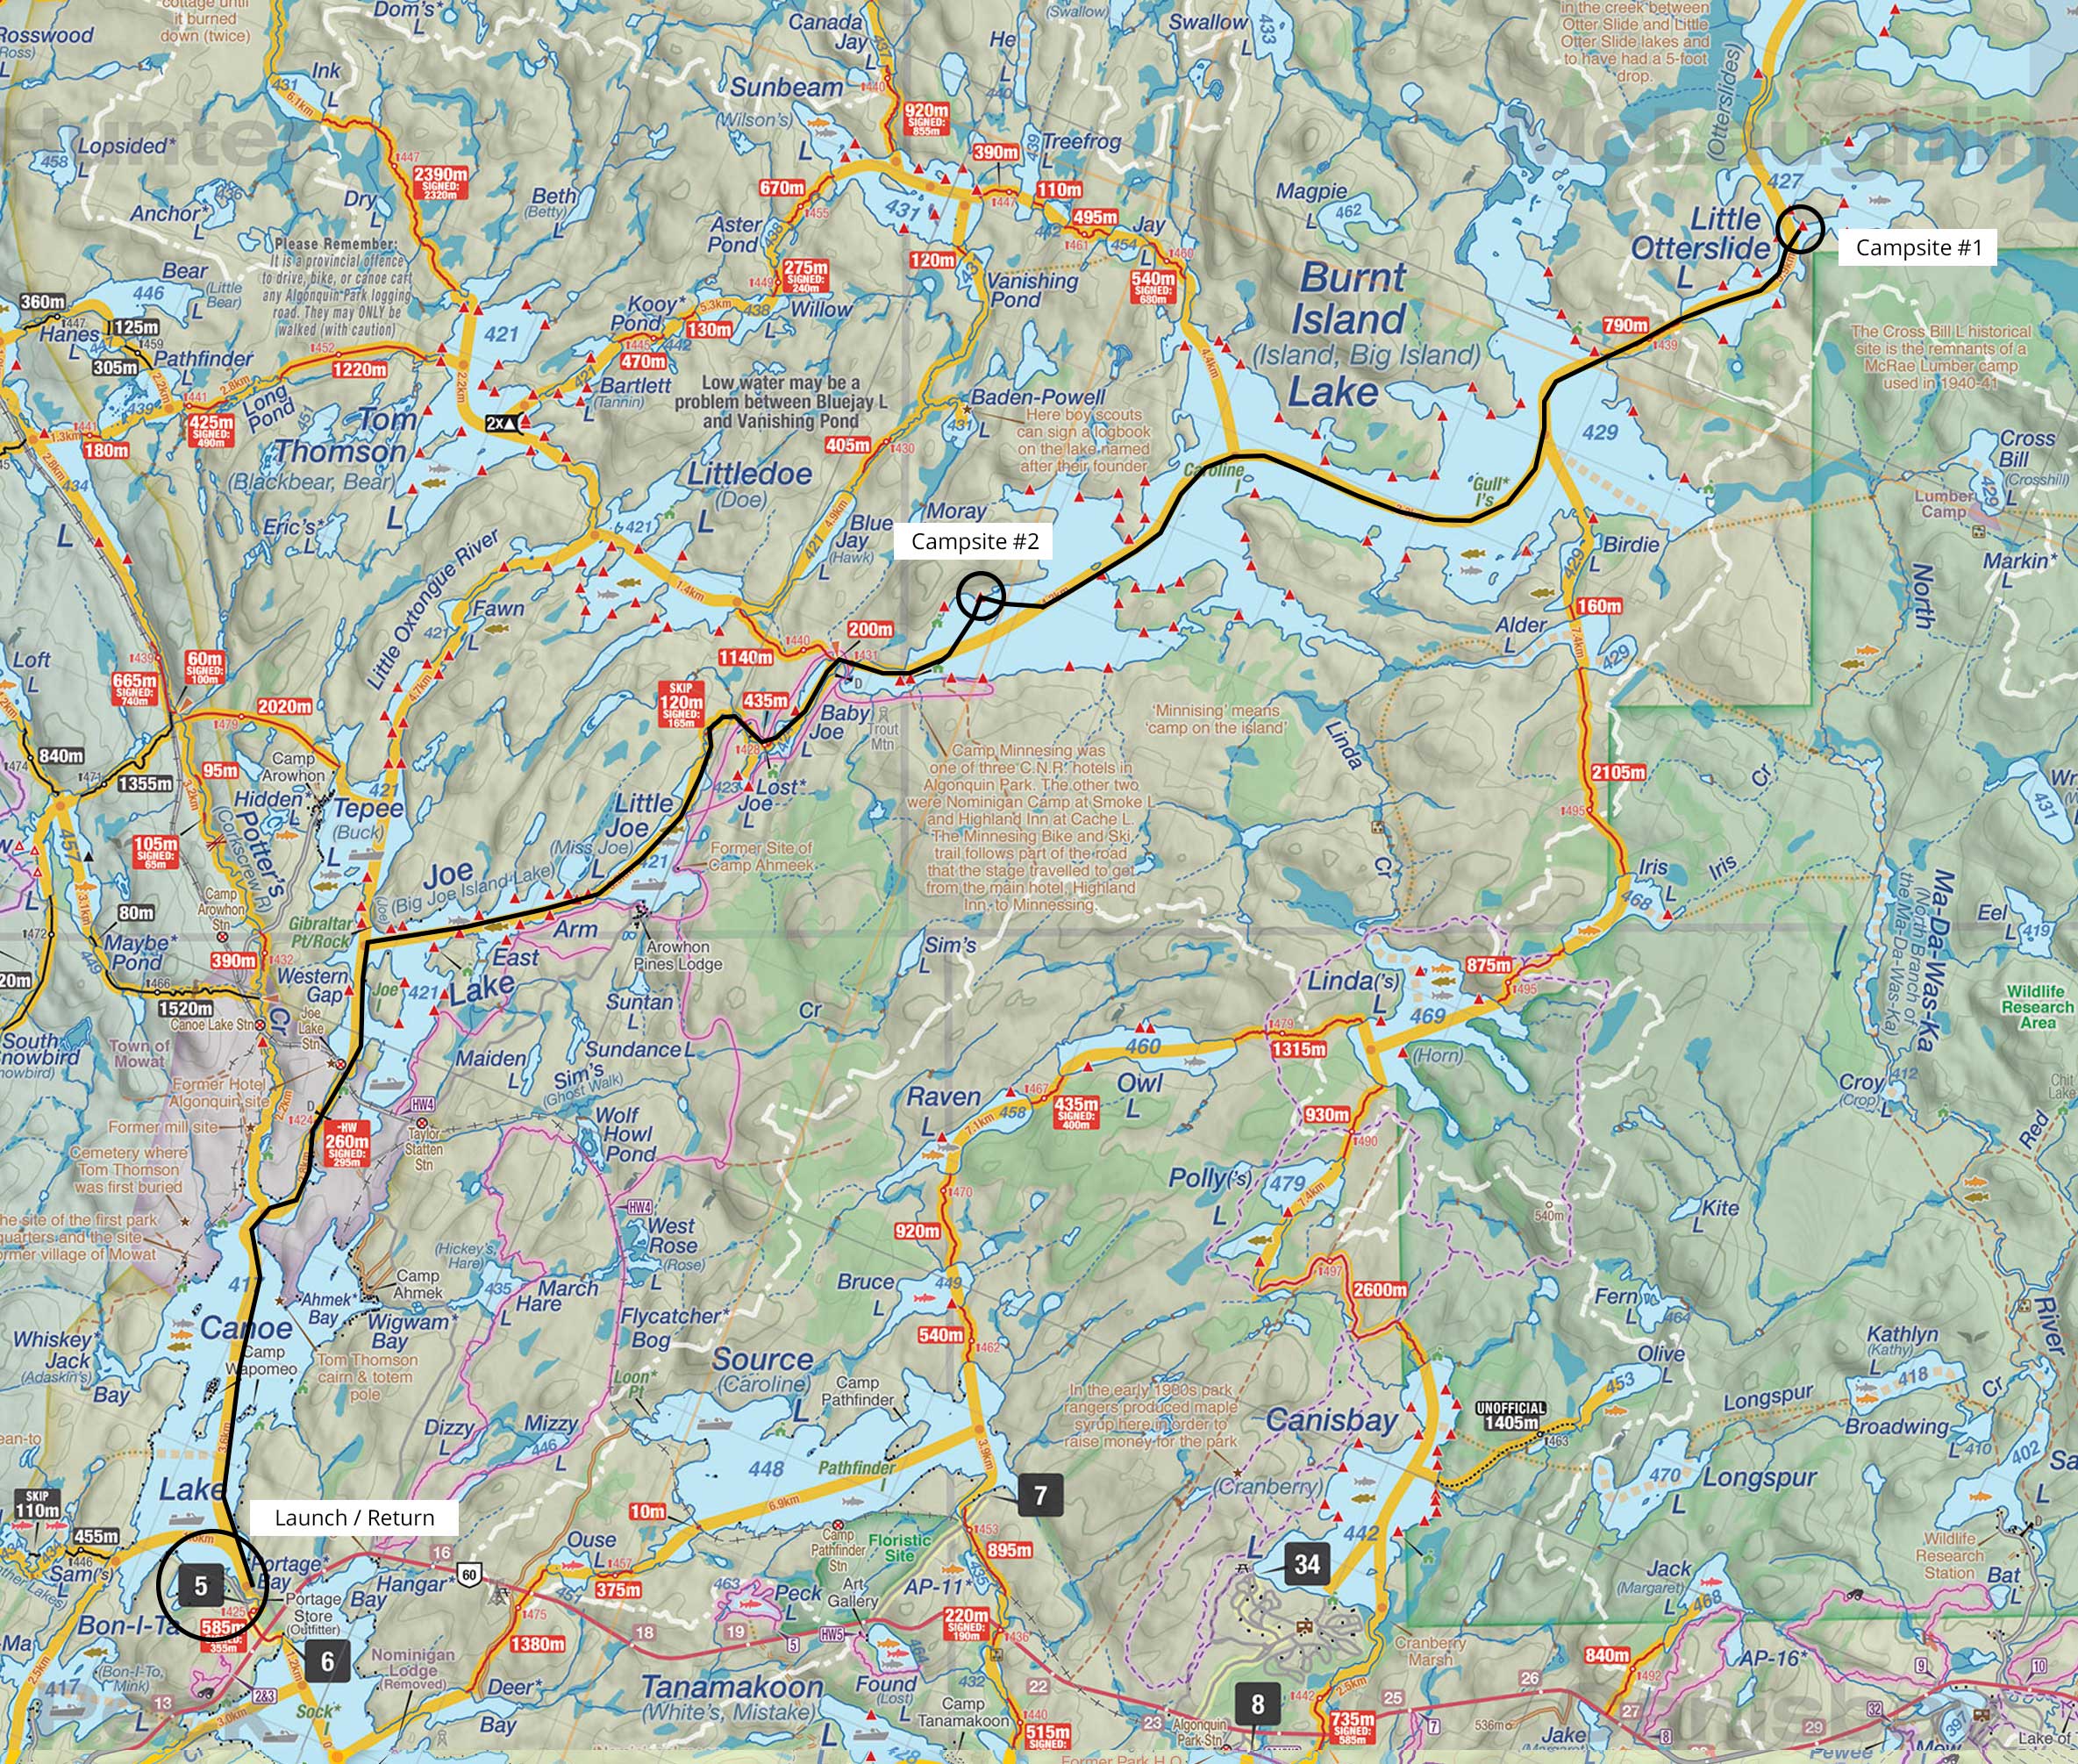 Trip Reports My First Solo Canoe Trip Map and Details